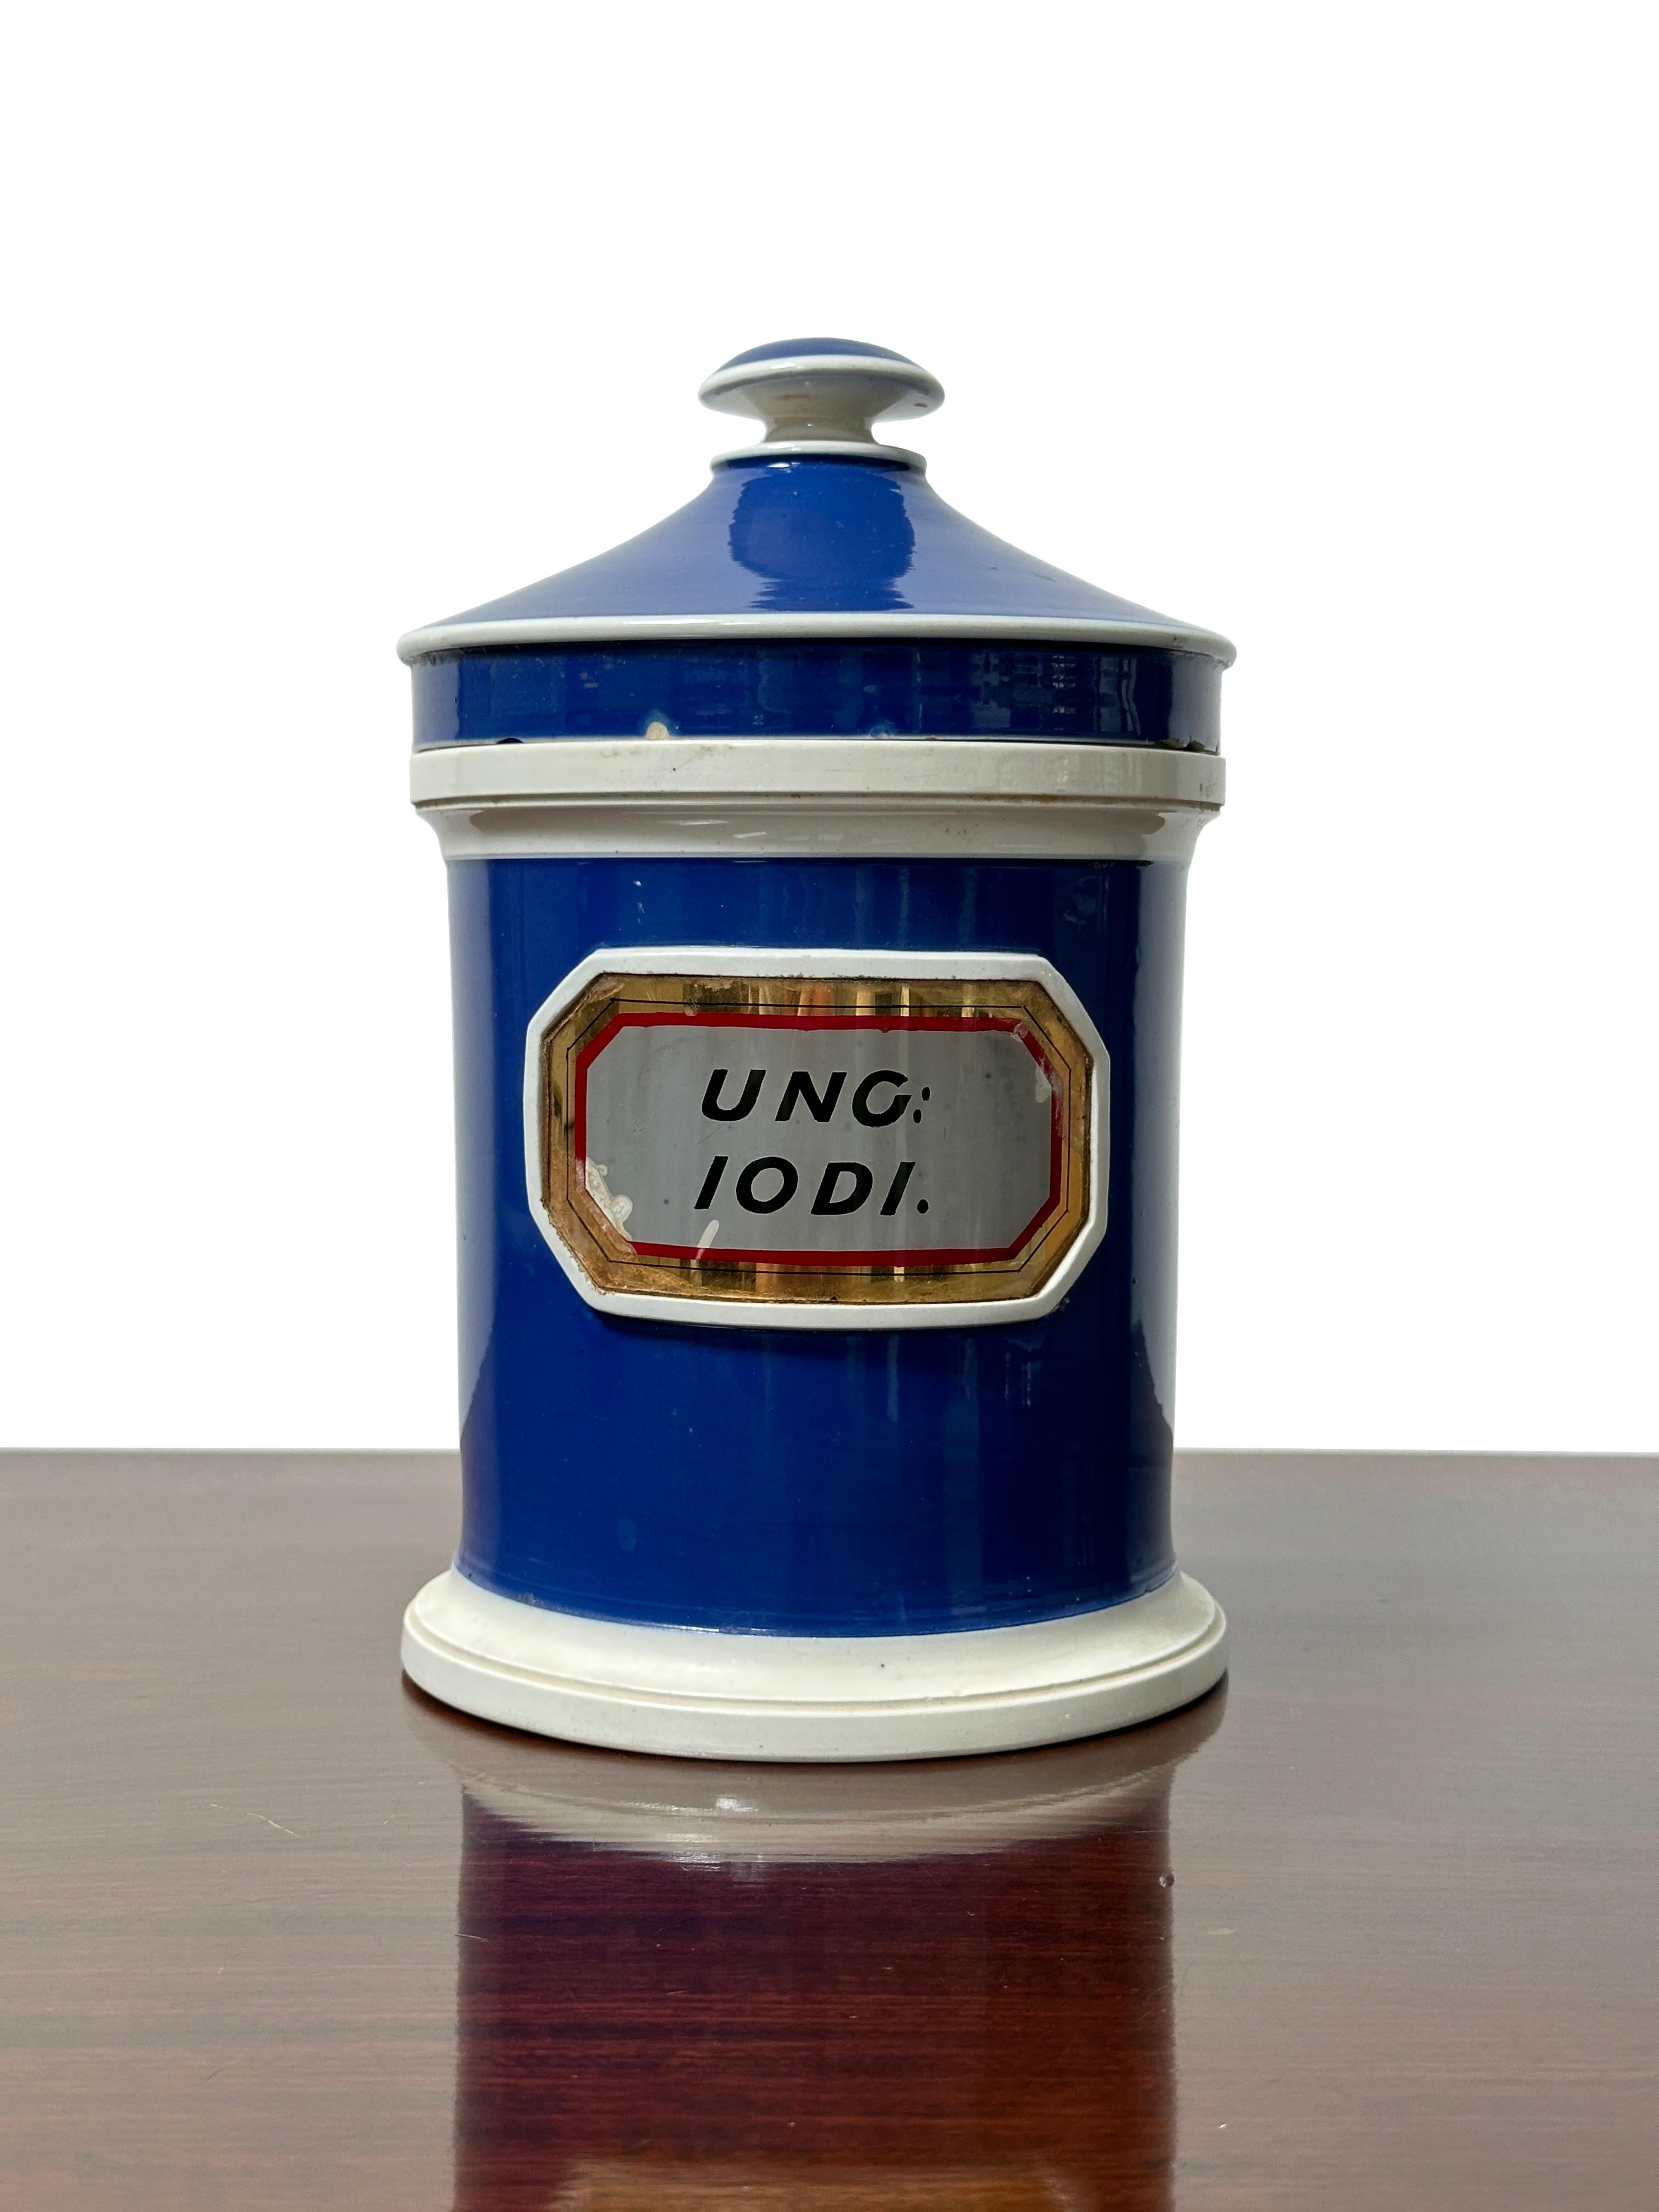 - A beautiful blue and white Victorian apothecary jar, circa 1900.
- Excellent glass and gilt lettered plaque to the front with original lid. 
- The fine white, gold and red glass covered foil label reads 'UNG: IODI.'
- Wonderful condition for its